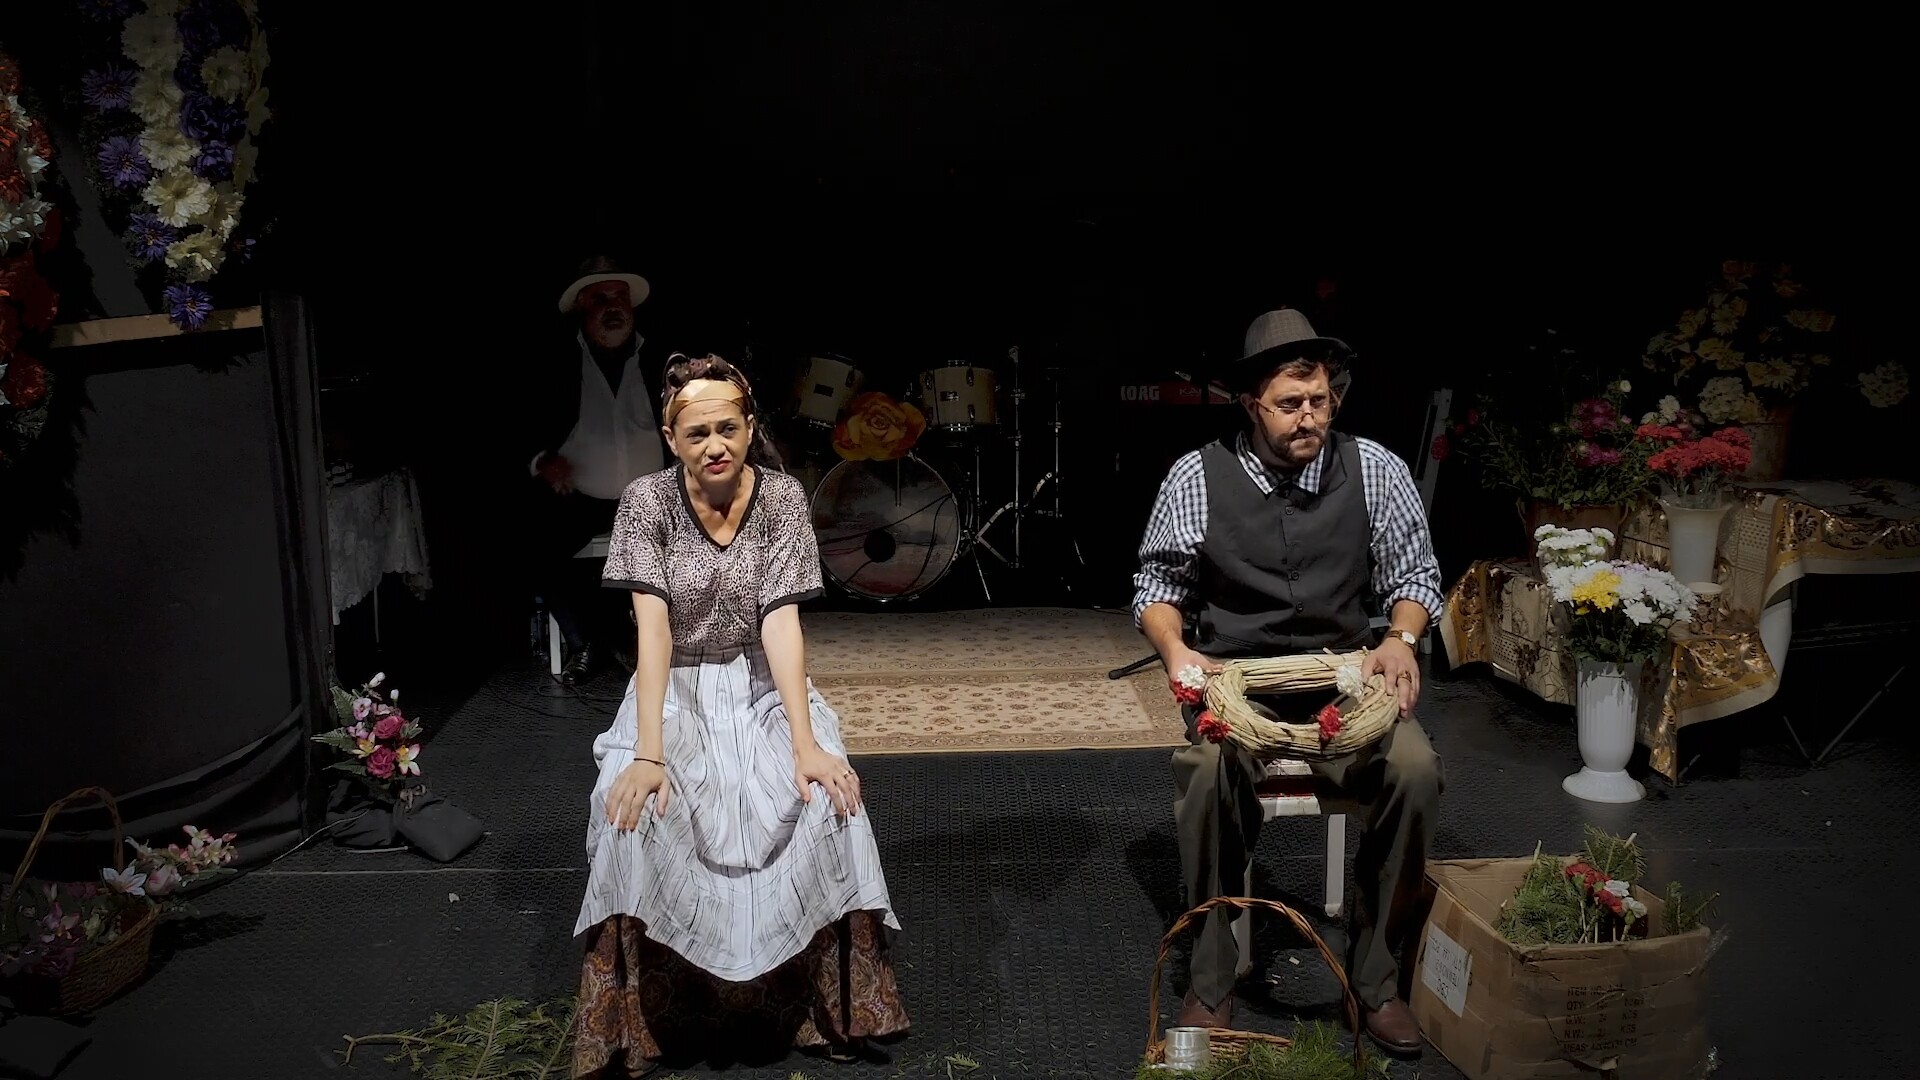 A woman and a man in vintage clothing sitting on stage.